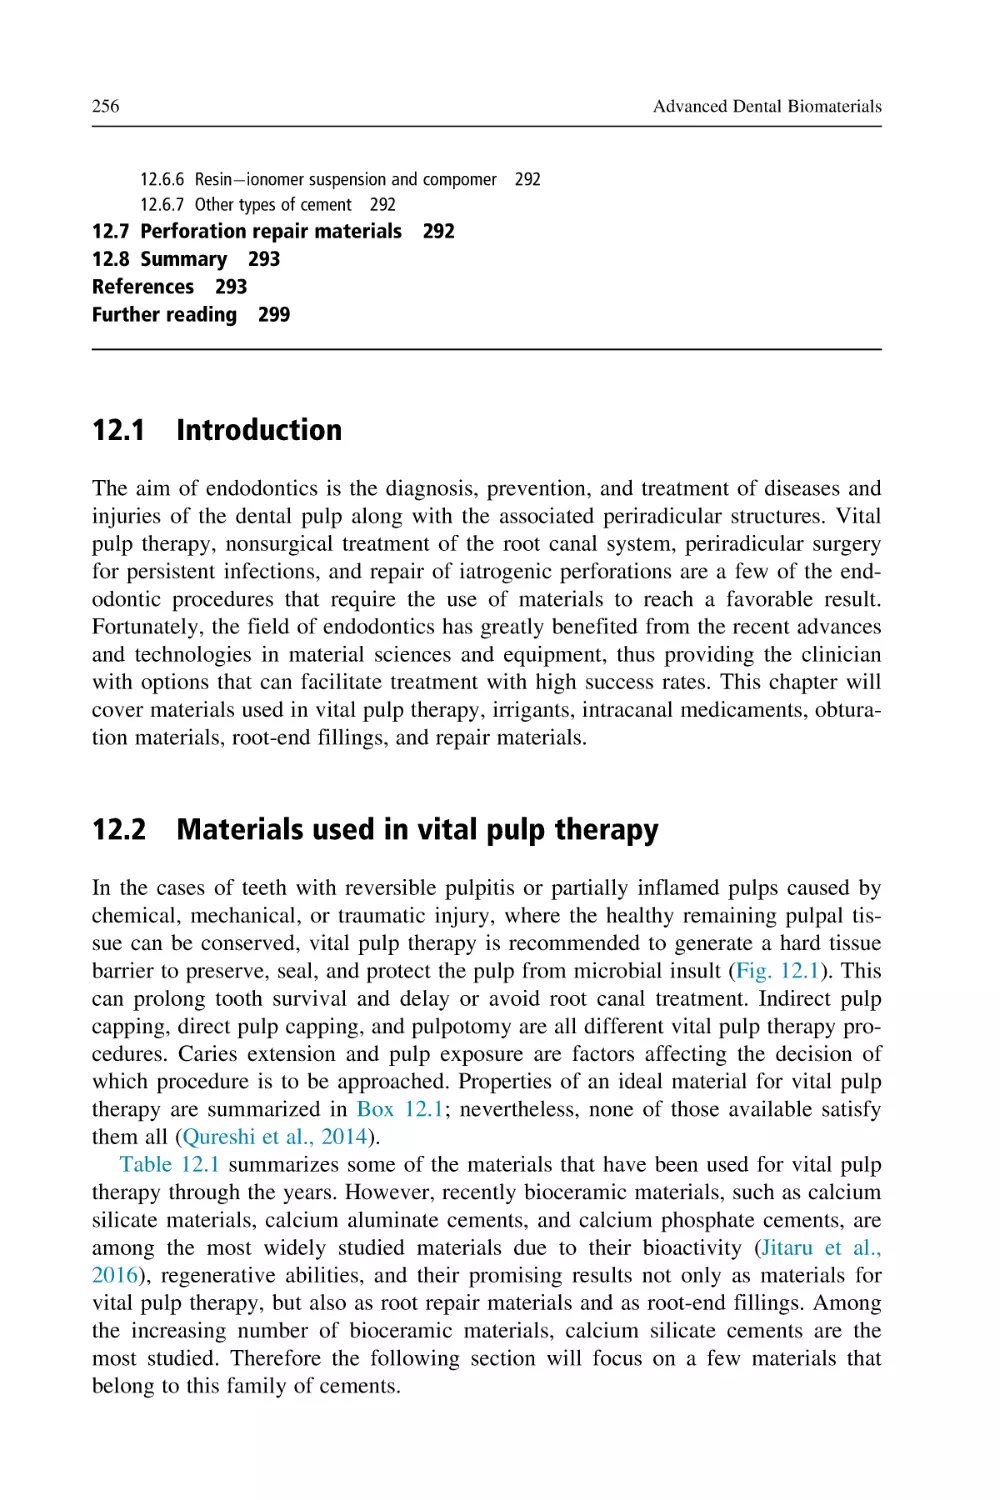 12.1 Introduction
12.2 Materials used in vital pulp therapy